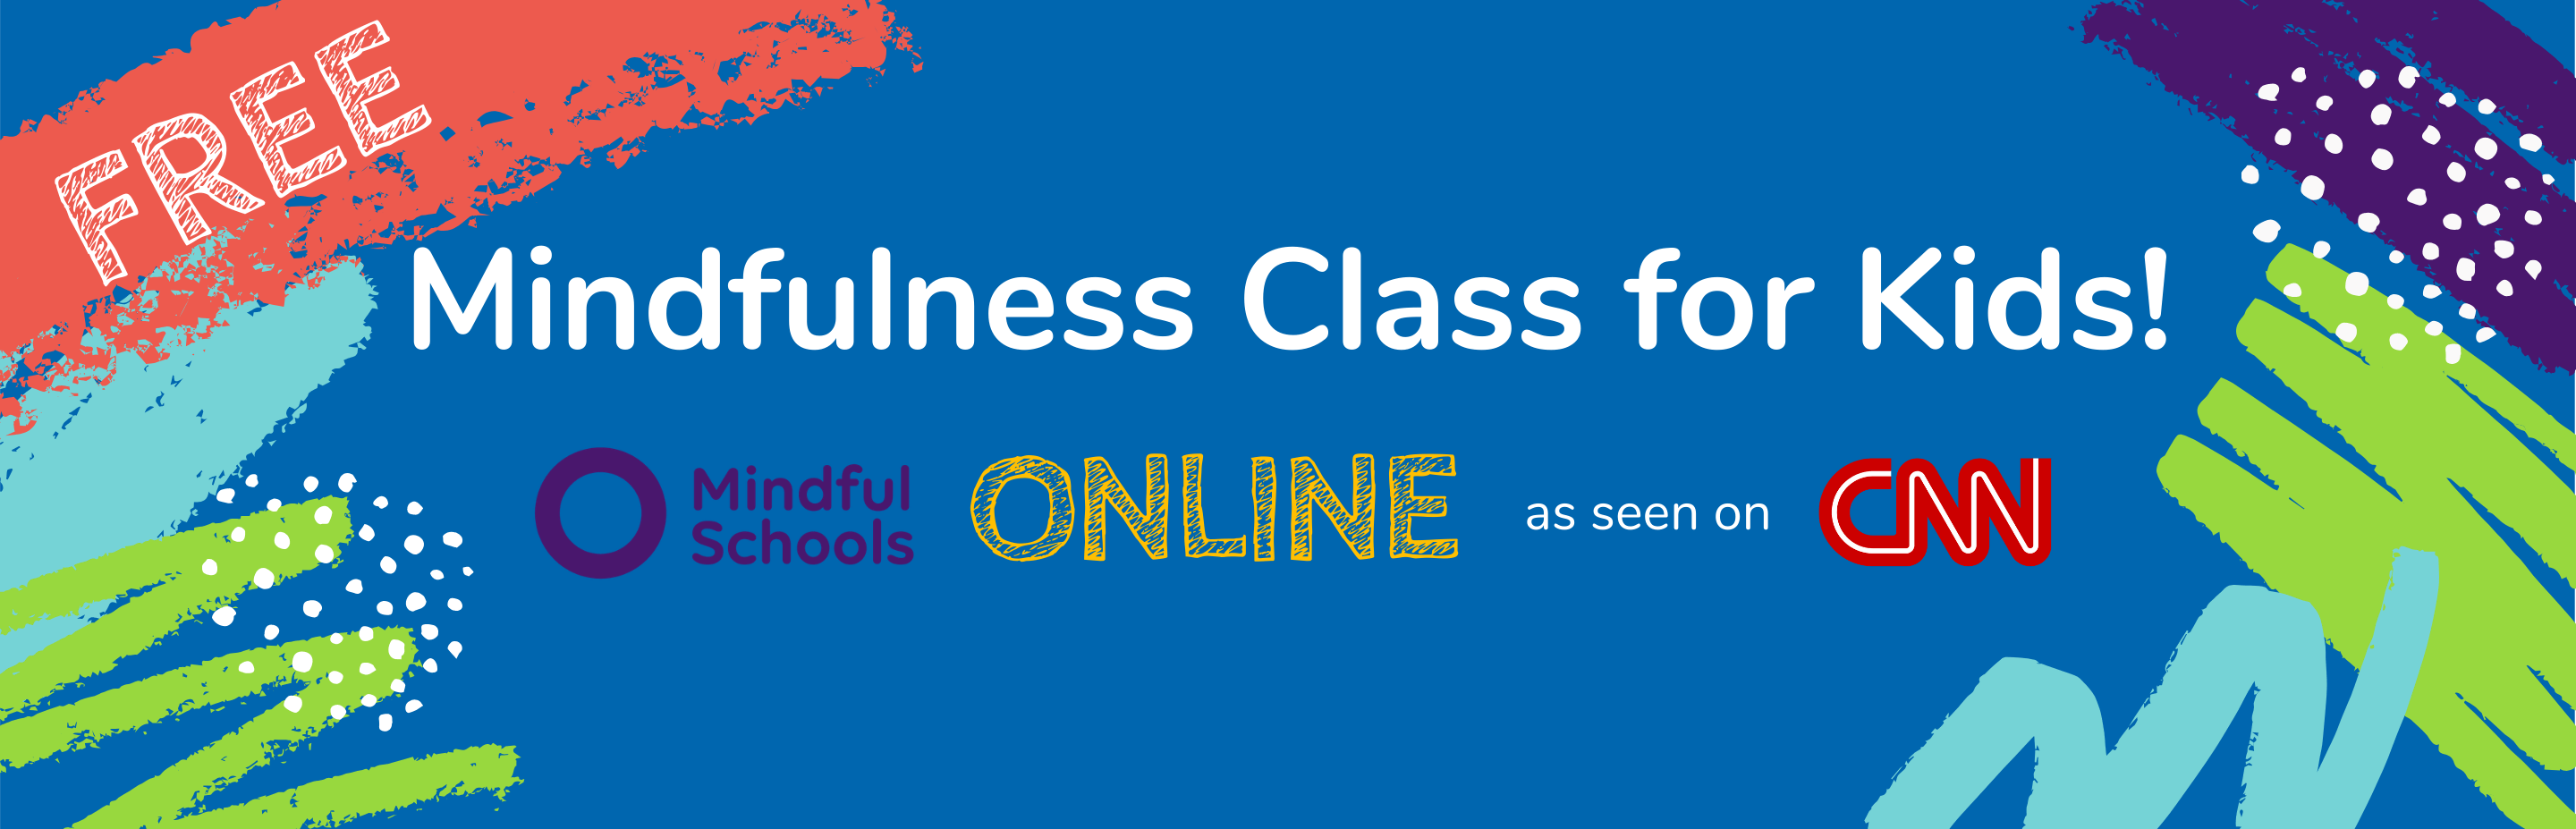 Free: Online Mindfulness Class for Kids!